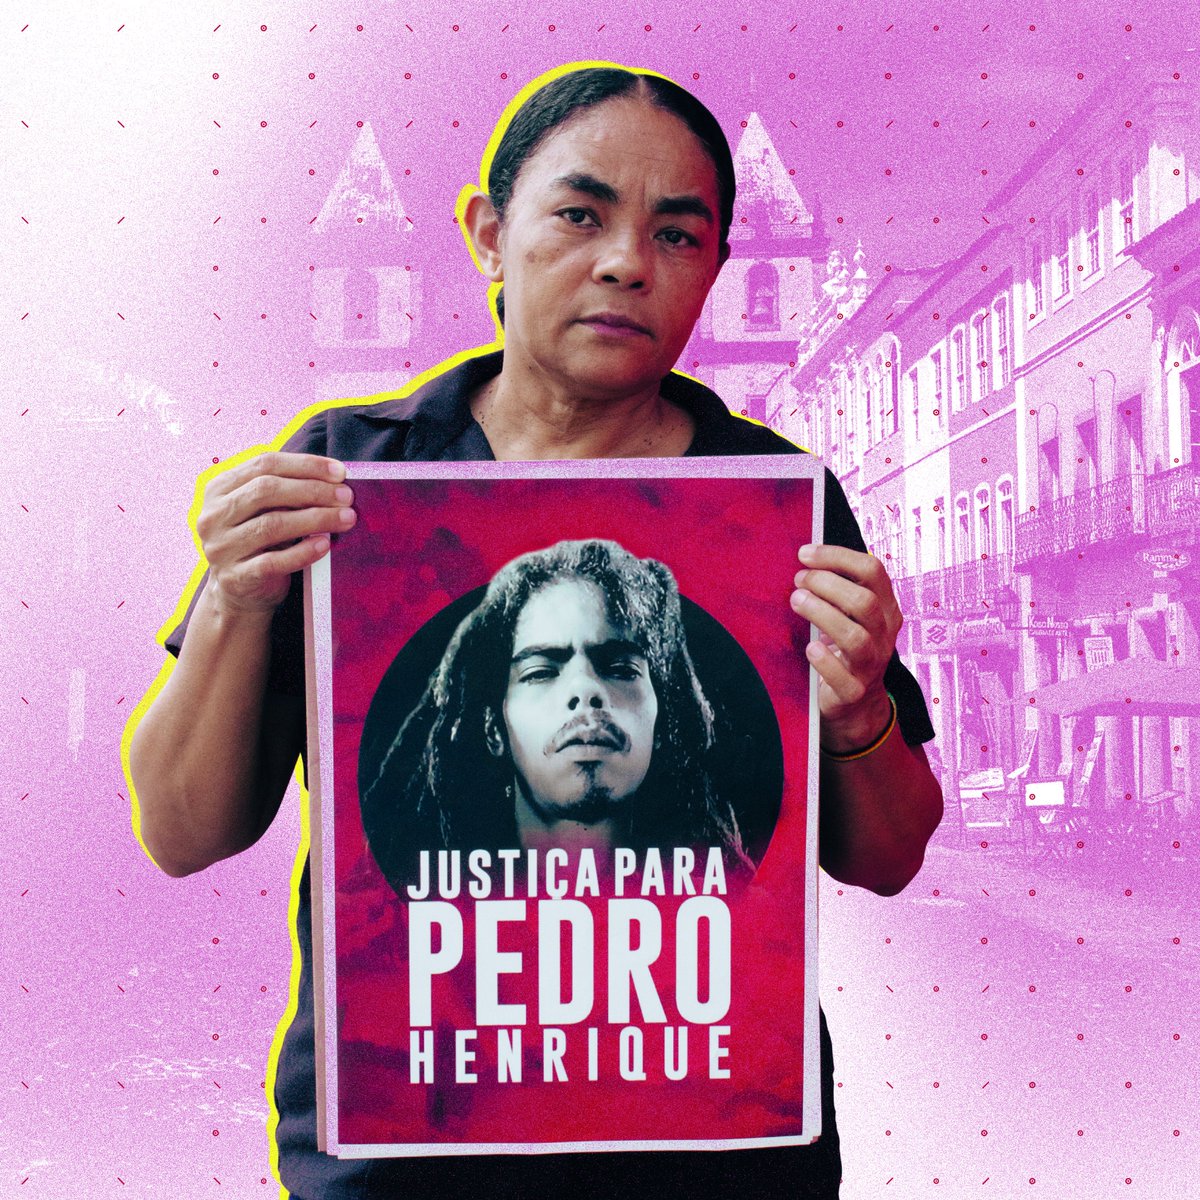 Brazilian activist Pedro Henrique was shot dead by hooded men, aged 31. Four years later, the police officers suspected of his killing are still on duty. Support Pedro’s mother, Ana Maria, by demanding justice for her son’s death. #WriteforRights amnesty.ie/wfr-ana-maria-…